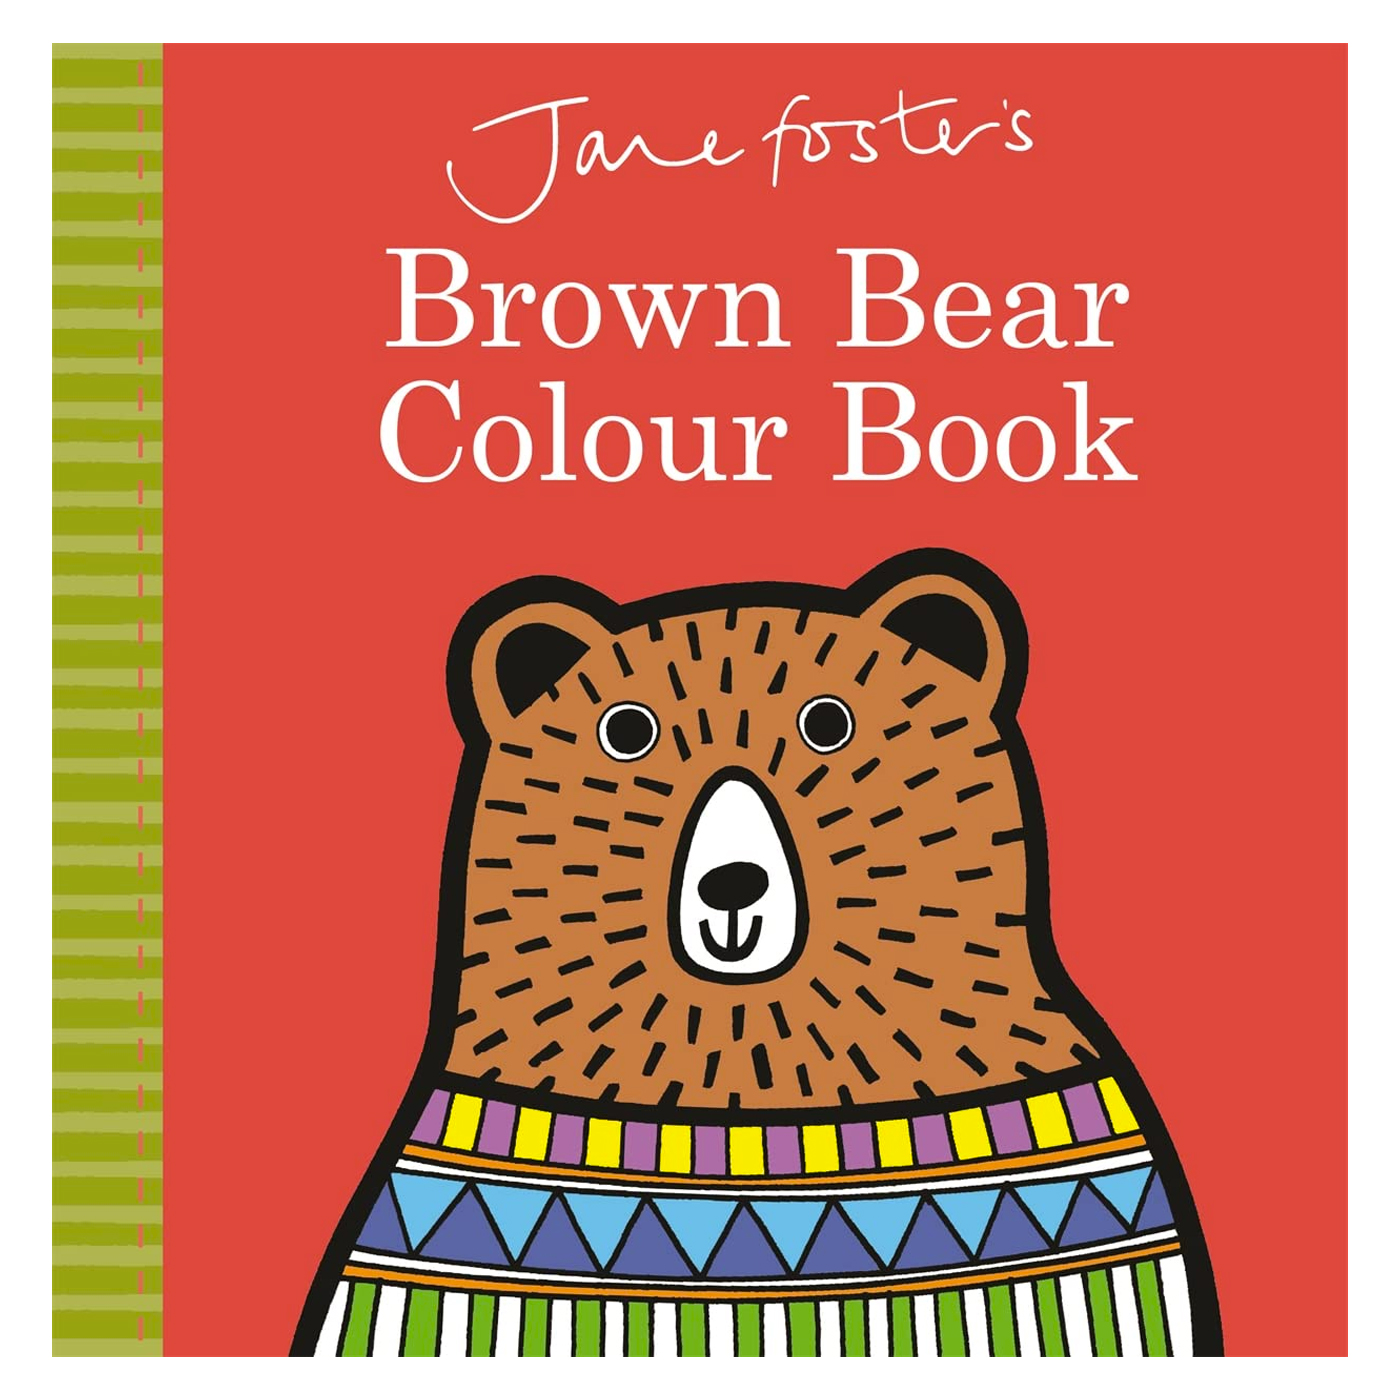  Jane Foster's Brown Bear Colour Book